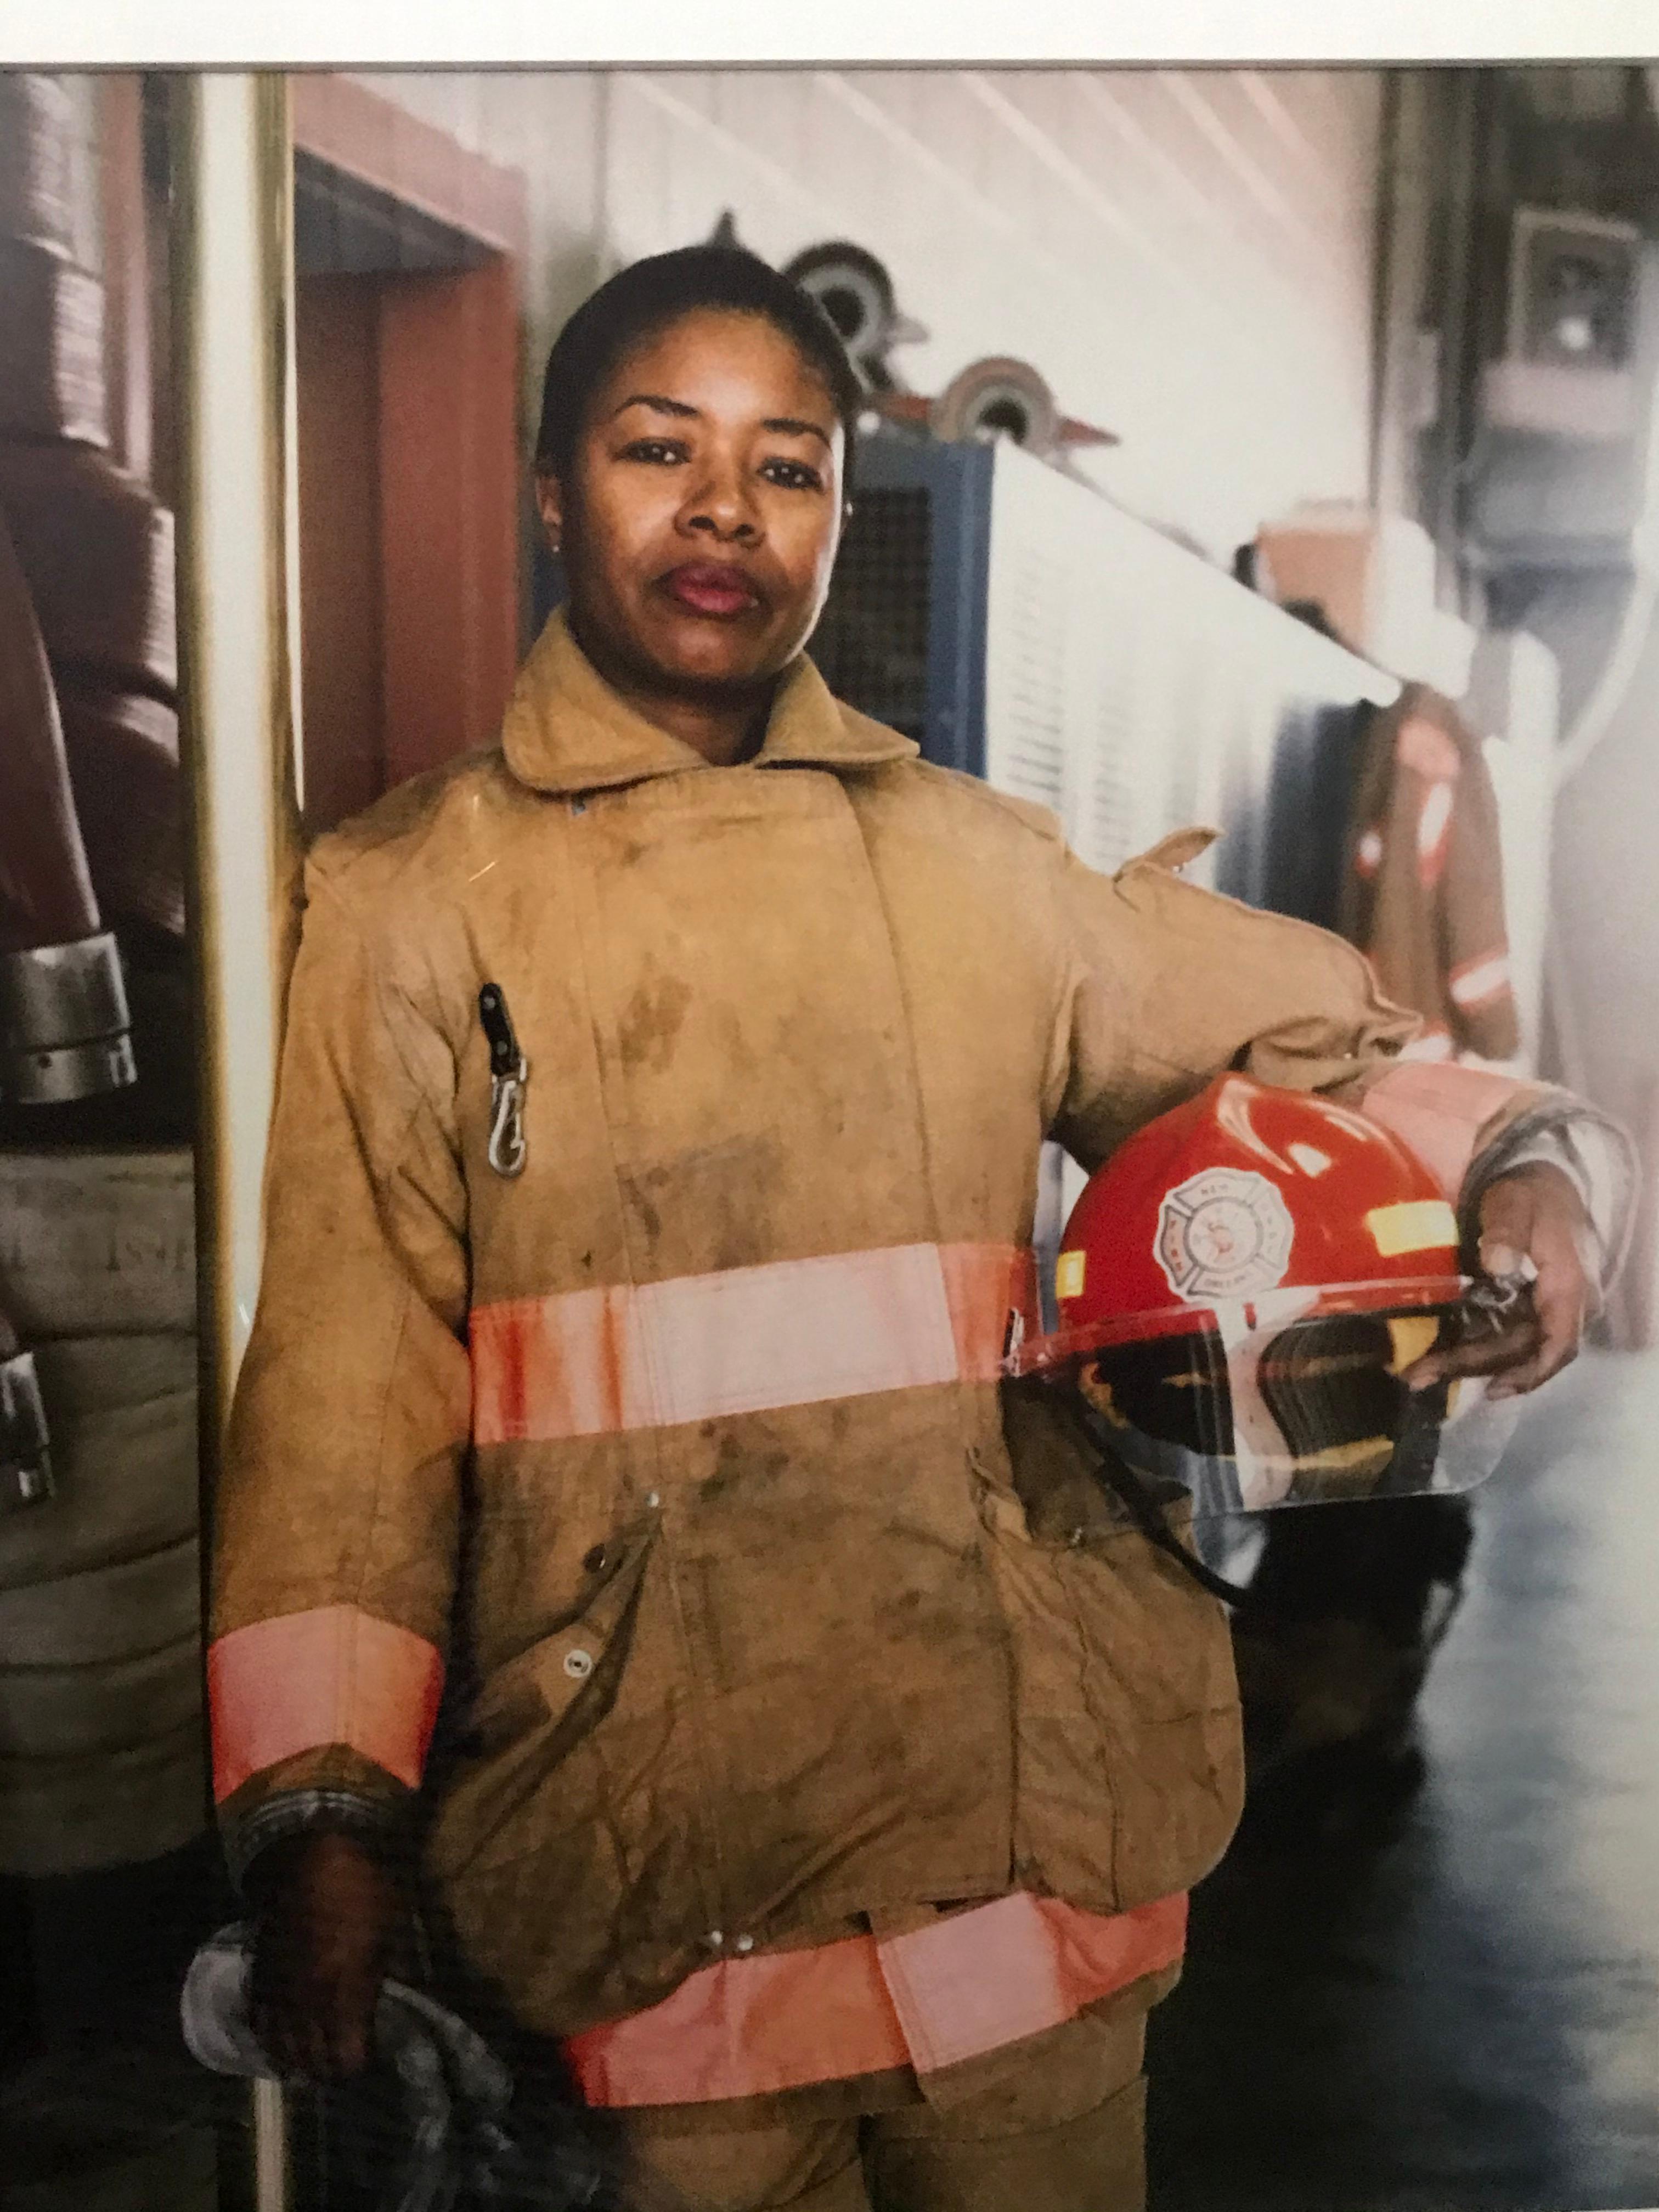 First Female Firefighter Kathy E. Morris by Photograph Jeffrey Henson Scales In Good Condition For Sale In Pasadena, CA